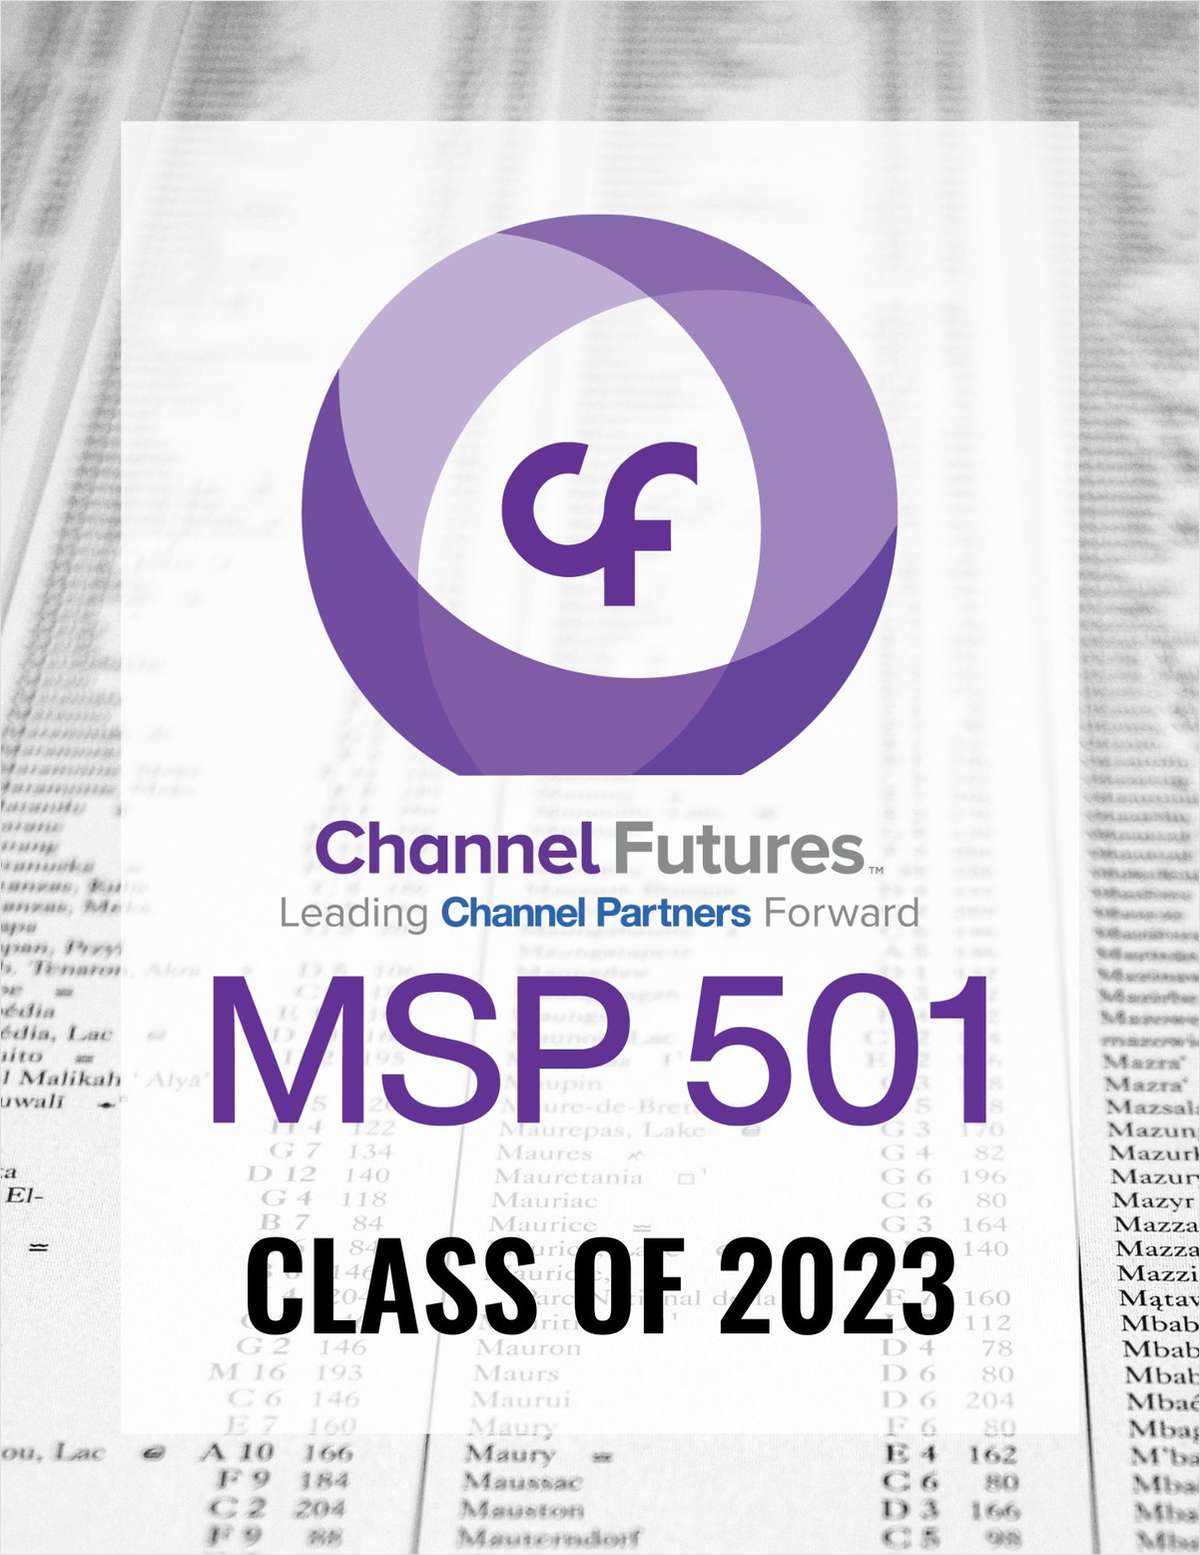 Channel Futures MSP 501 2023 Rankings - Get Notified